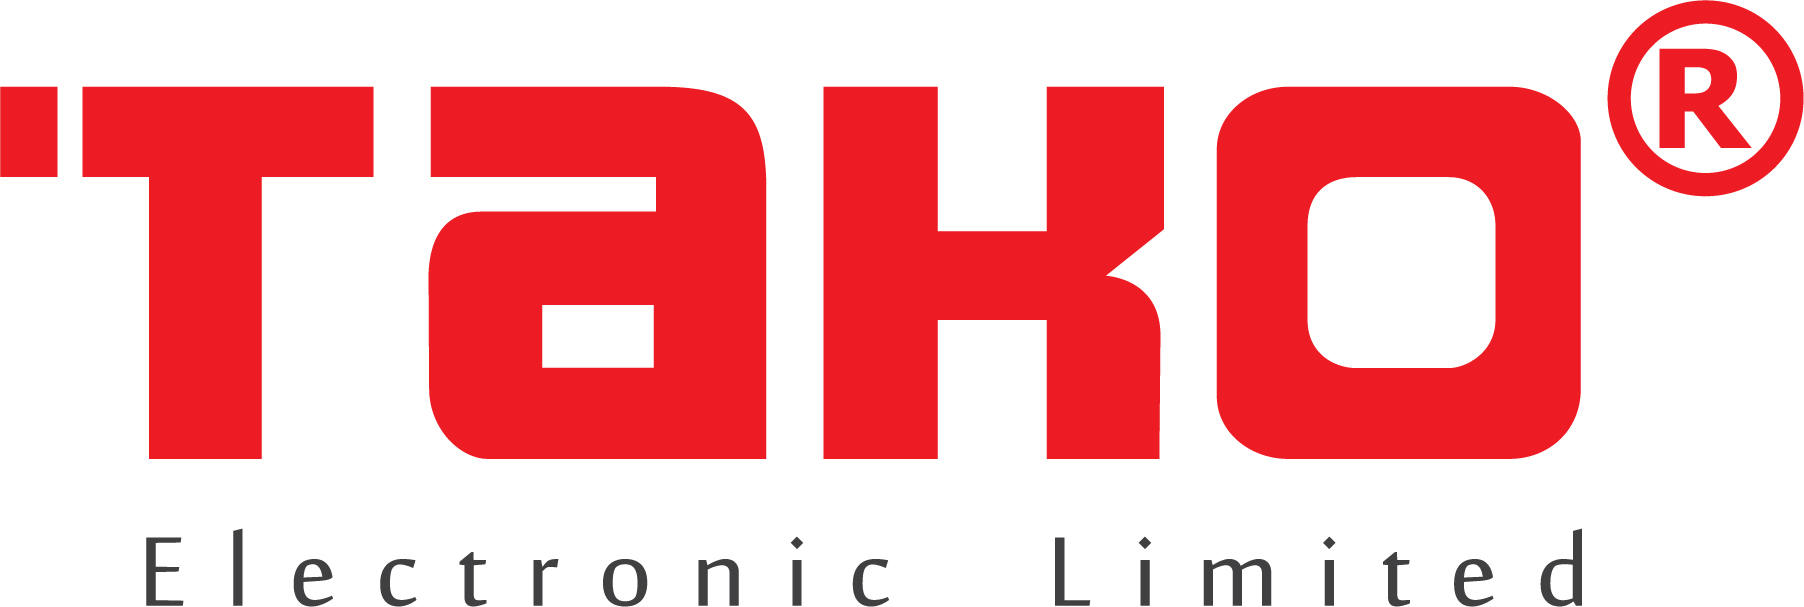 TUONG AN - T.A.K.O TECHNOLOGY ELECTRONIC COMPANY LIMITED